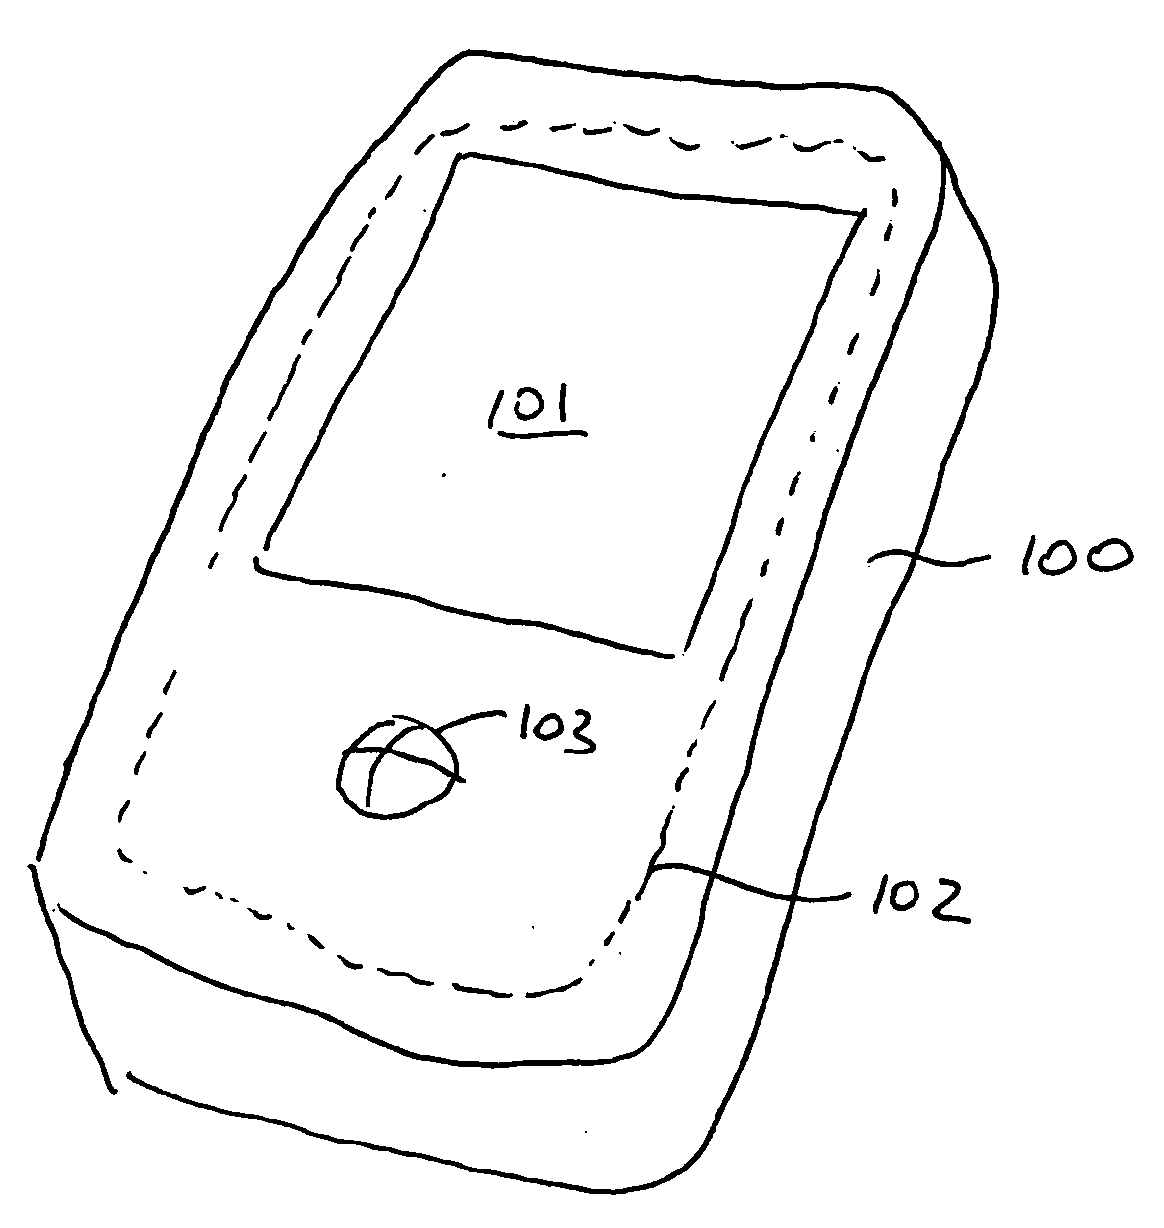 Extended touch-sensitive control area for electronic device